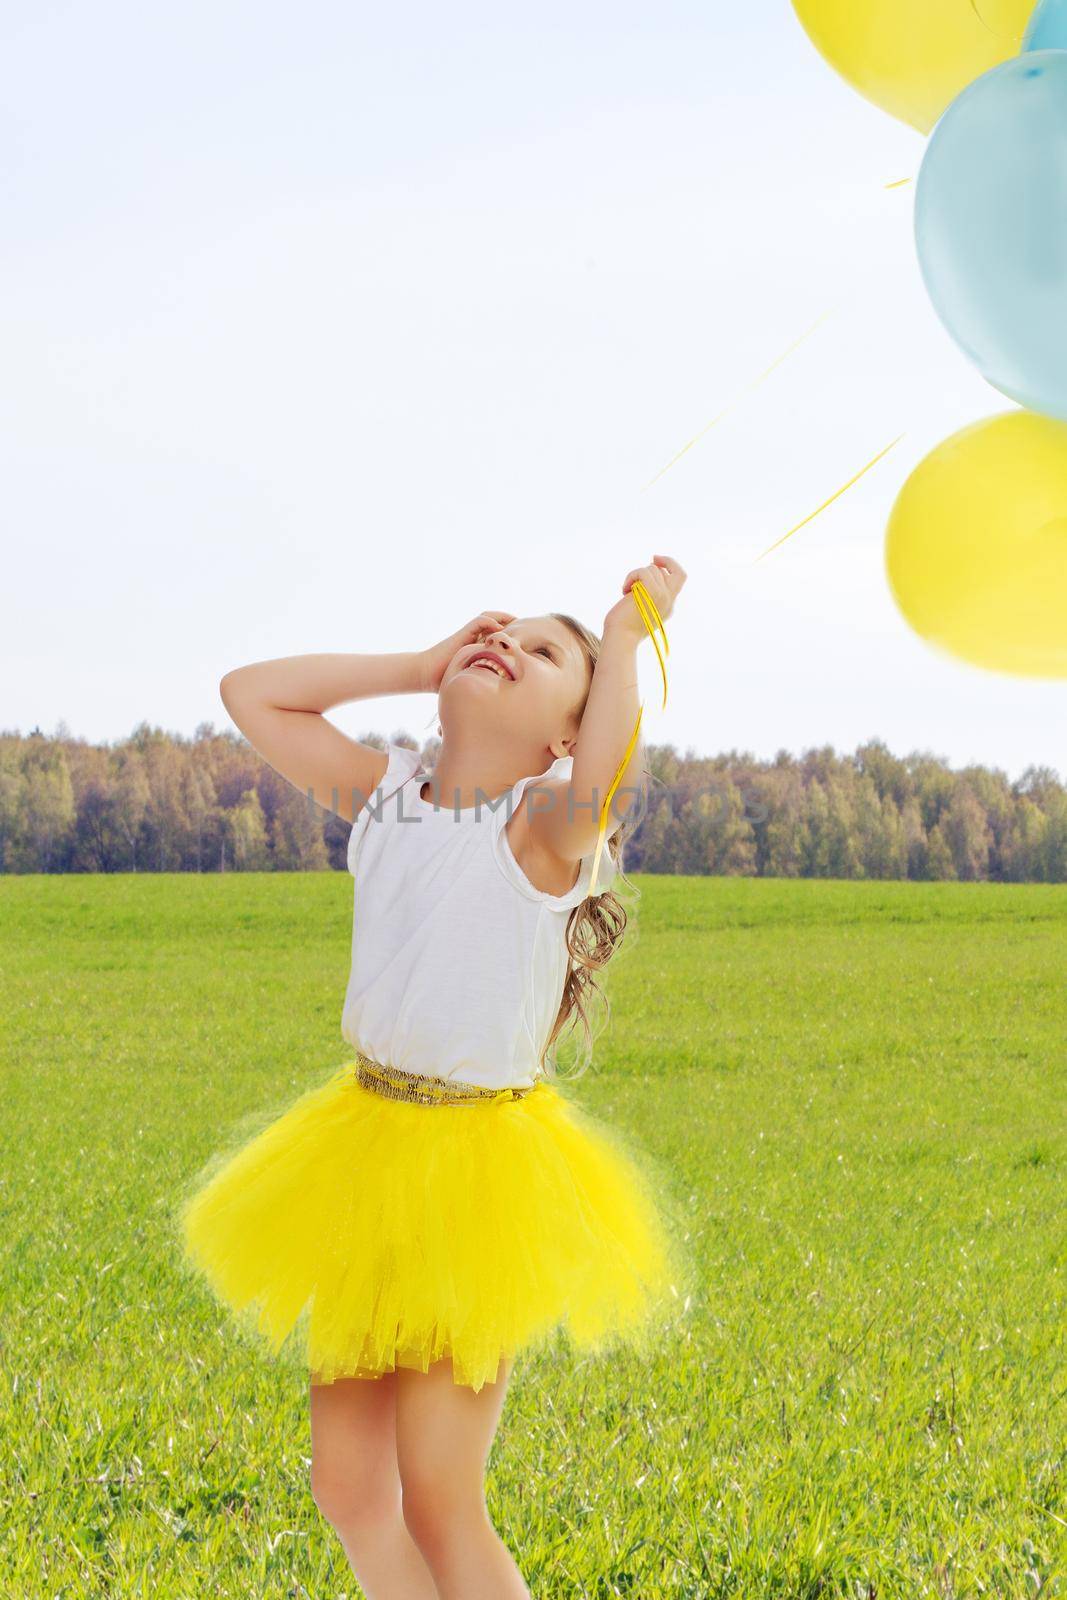 Pretty little blonde girl in a short bright yellow skirt and white blouse.Girl holds in hands balloons , She looks at them from the bottom up.On the background of green grass and blue sky with clouds.